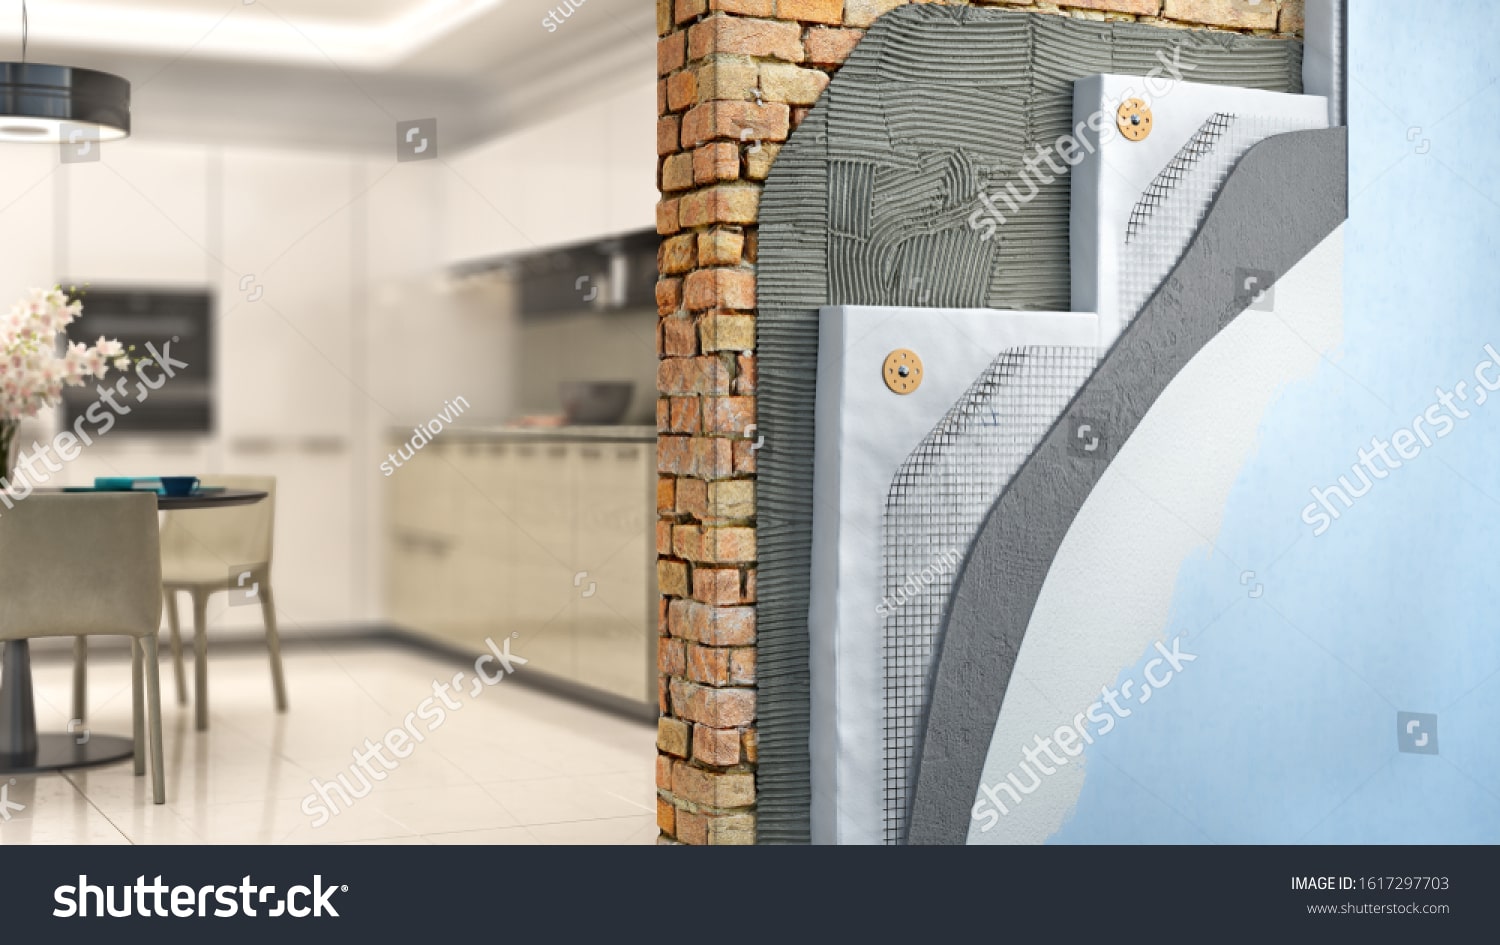 stock-photo-brickwall-thermal-insulation-by-styrofoam-with-kitchen-interior-on-background-d-illustration-1617297703-min